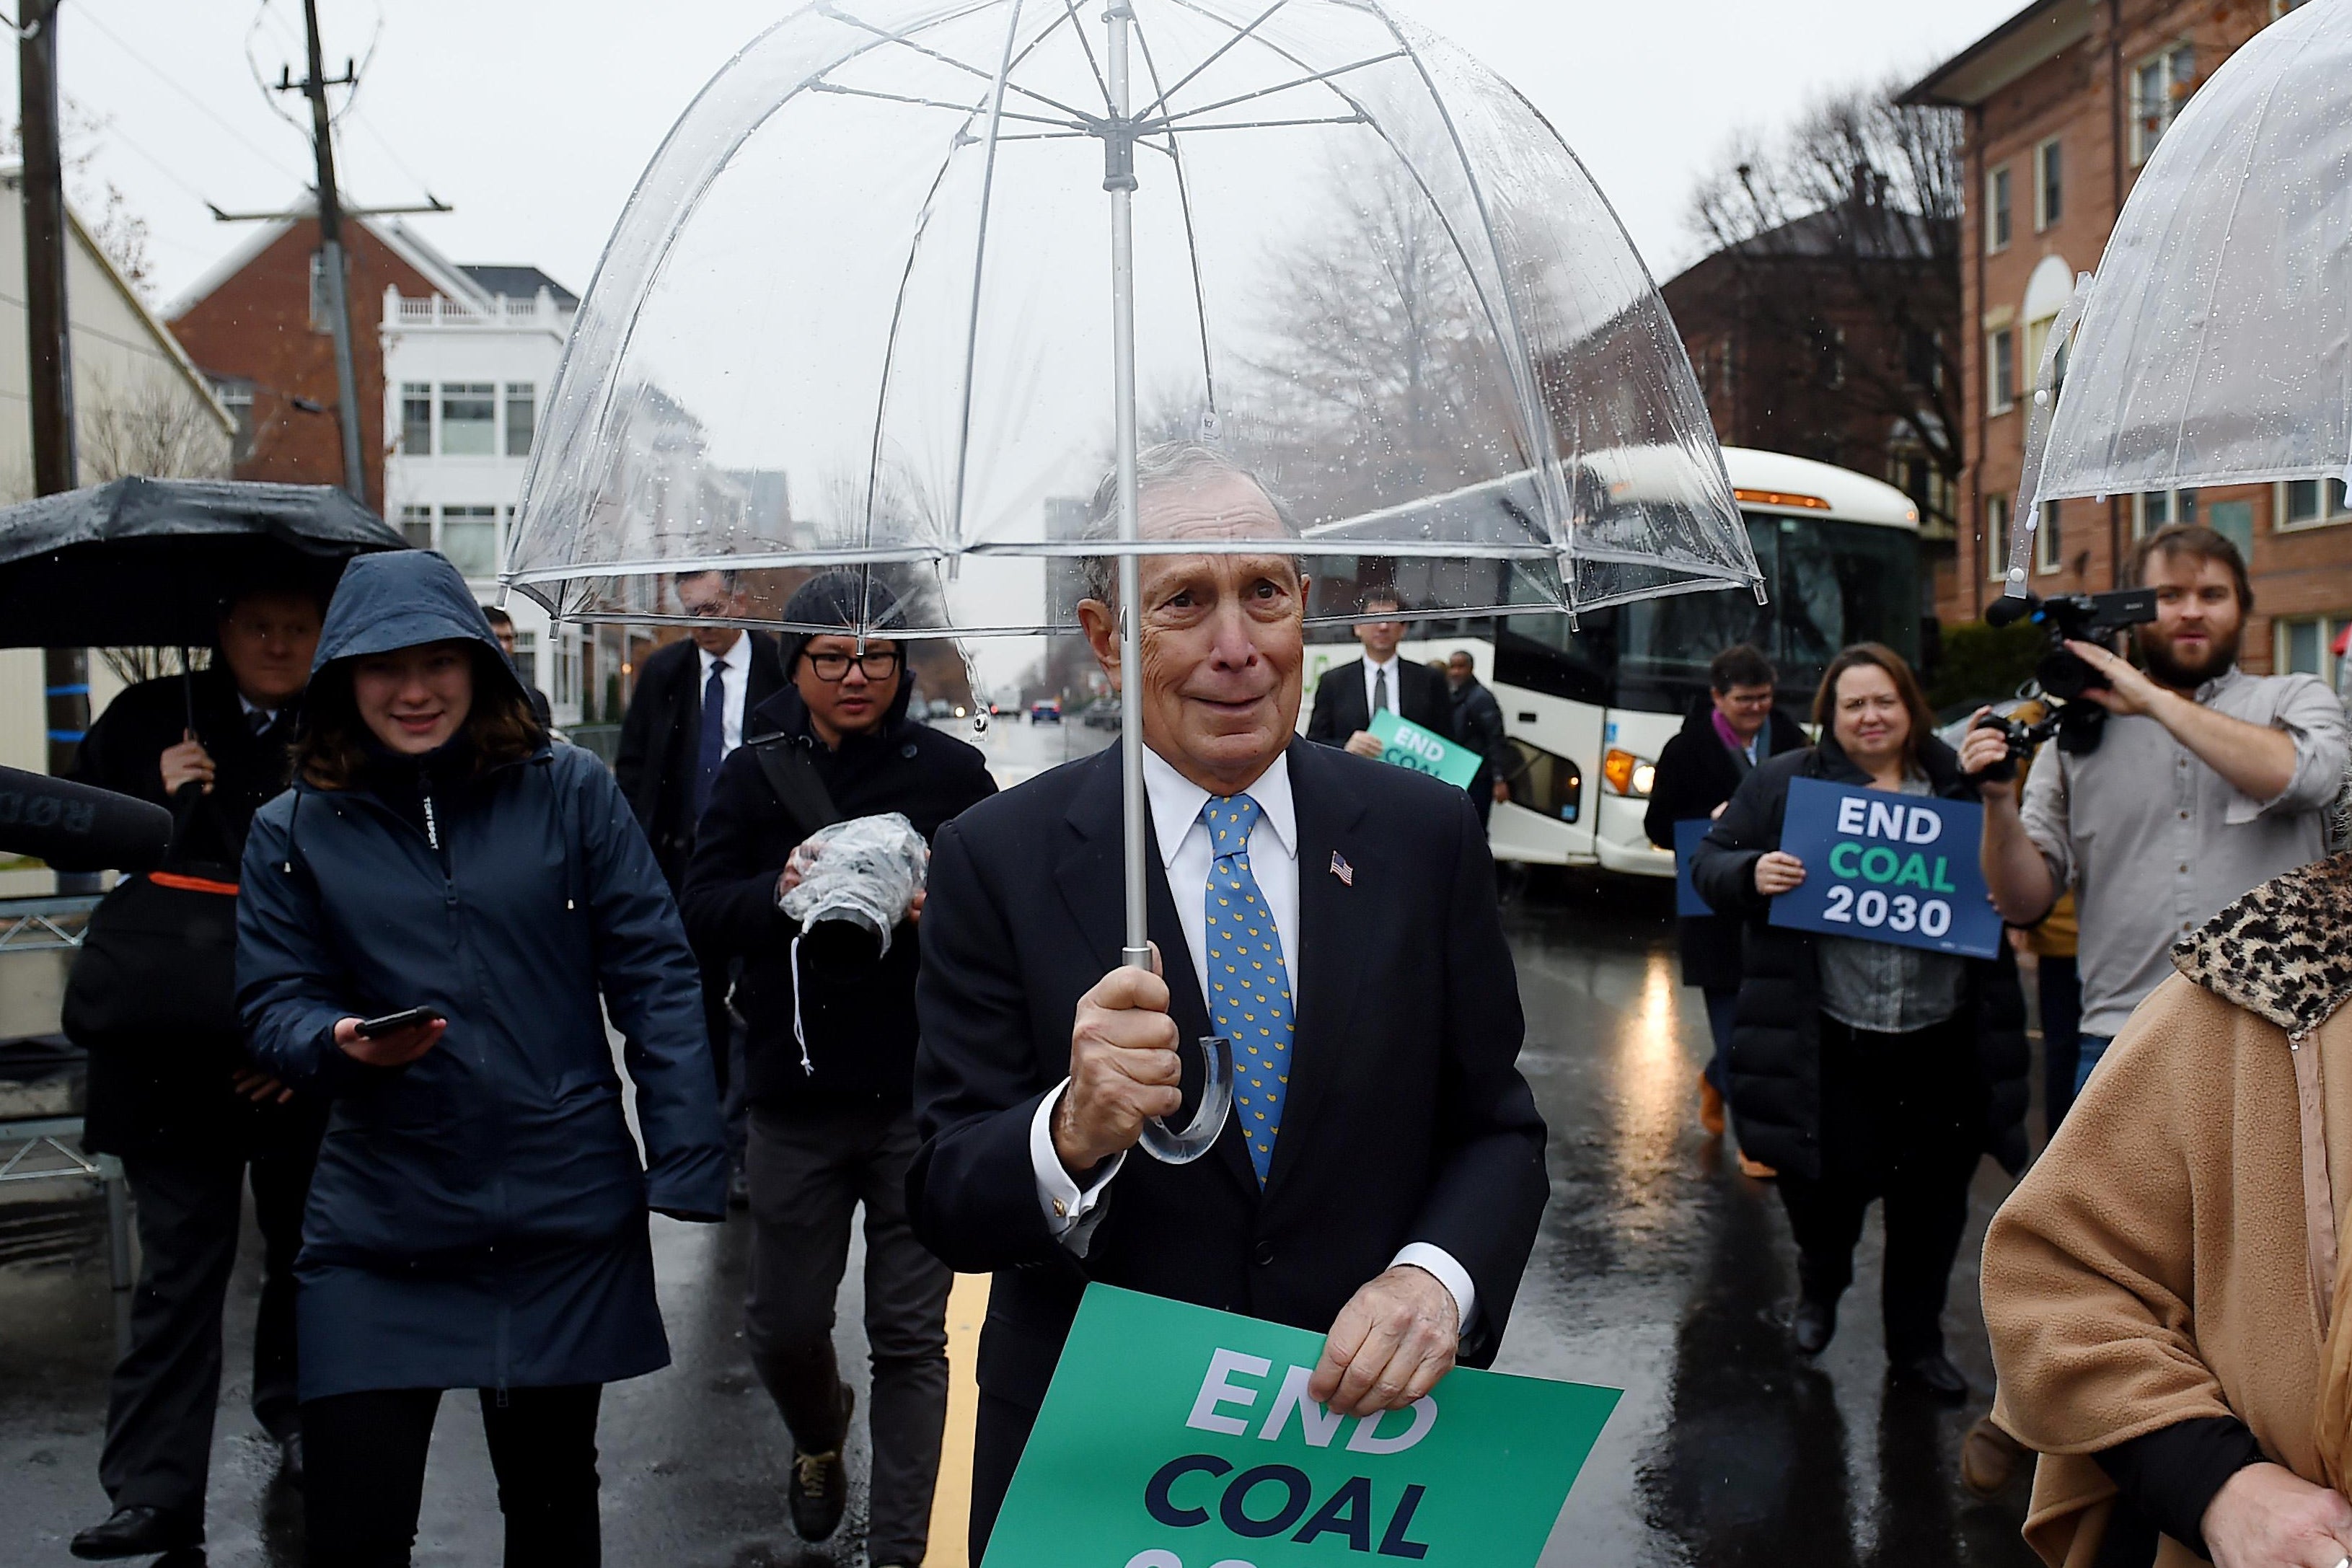 Michael Bloomberg walks with other people on a city street on a rainy day, carrying an umbrella and a sign that says "End Coal 2030."